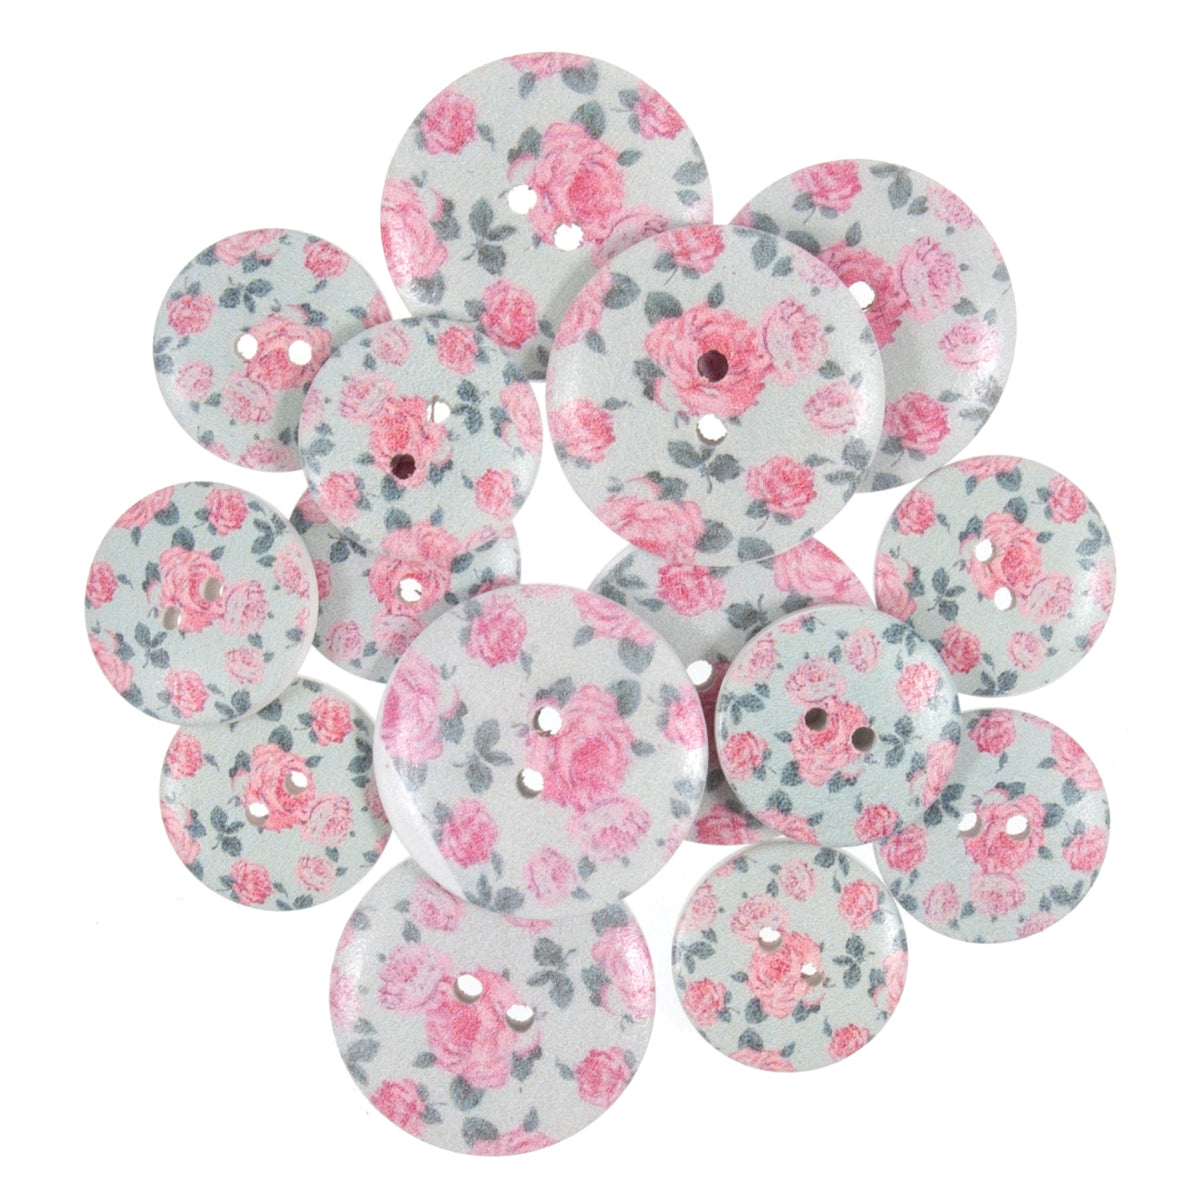 Craft Buttons - Grey Floral